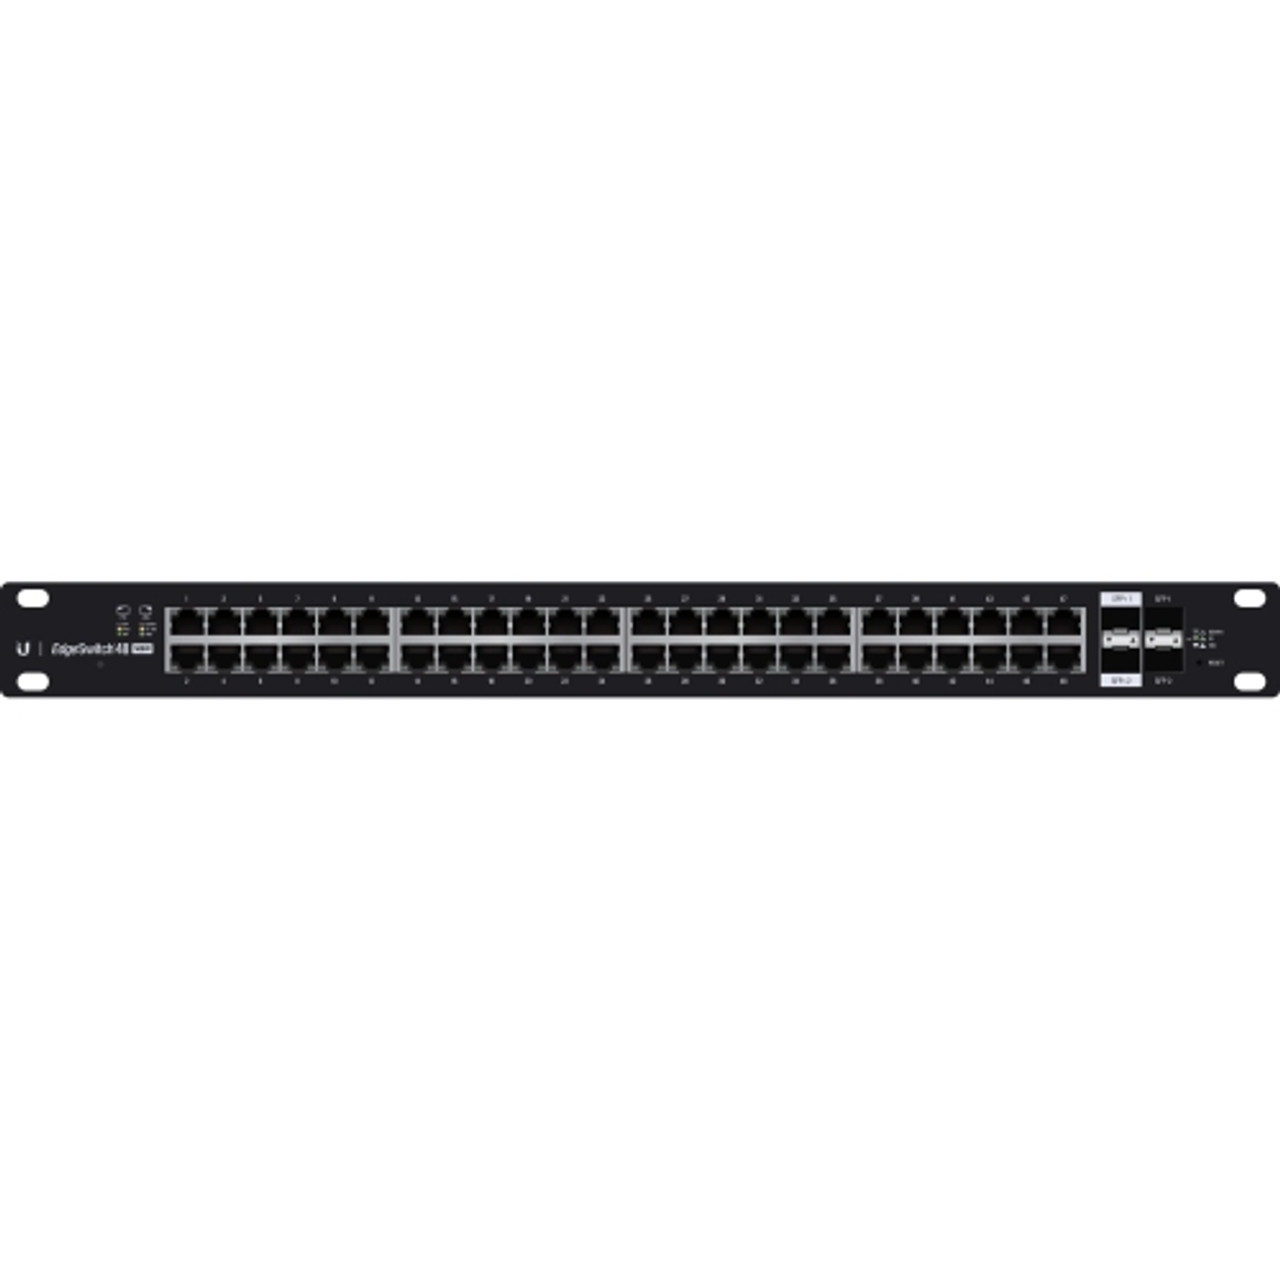 ES-48-500W Ubiquiti Networks EdgeSwitch 48-Ports SFP+ Gigabit Ethernet Layer 3 Switch Manageable 3 Layer Supported 1U High Rack-mountable (Refurbished)